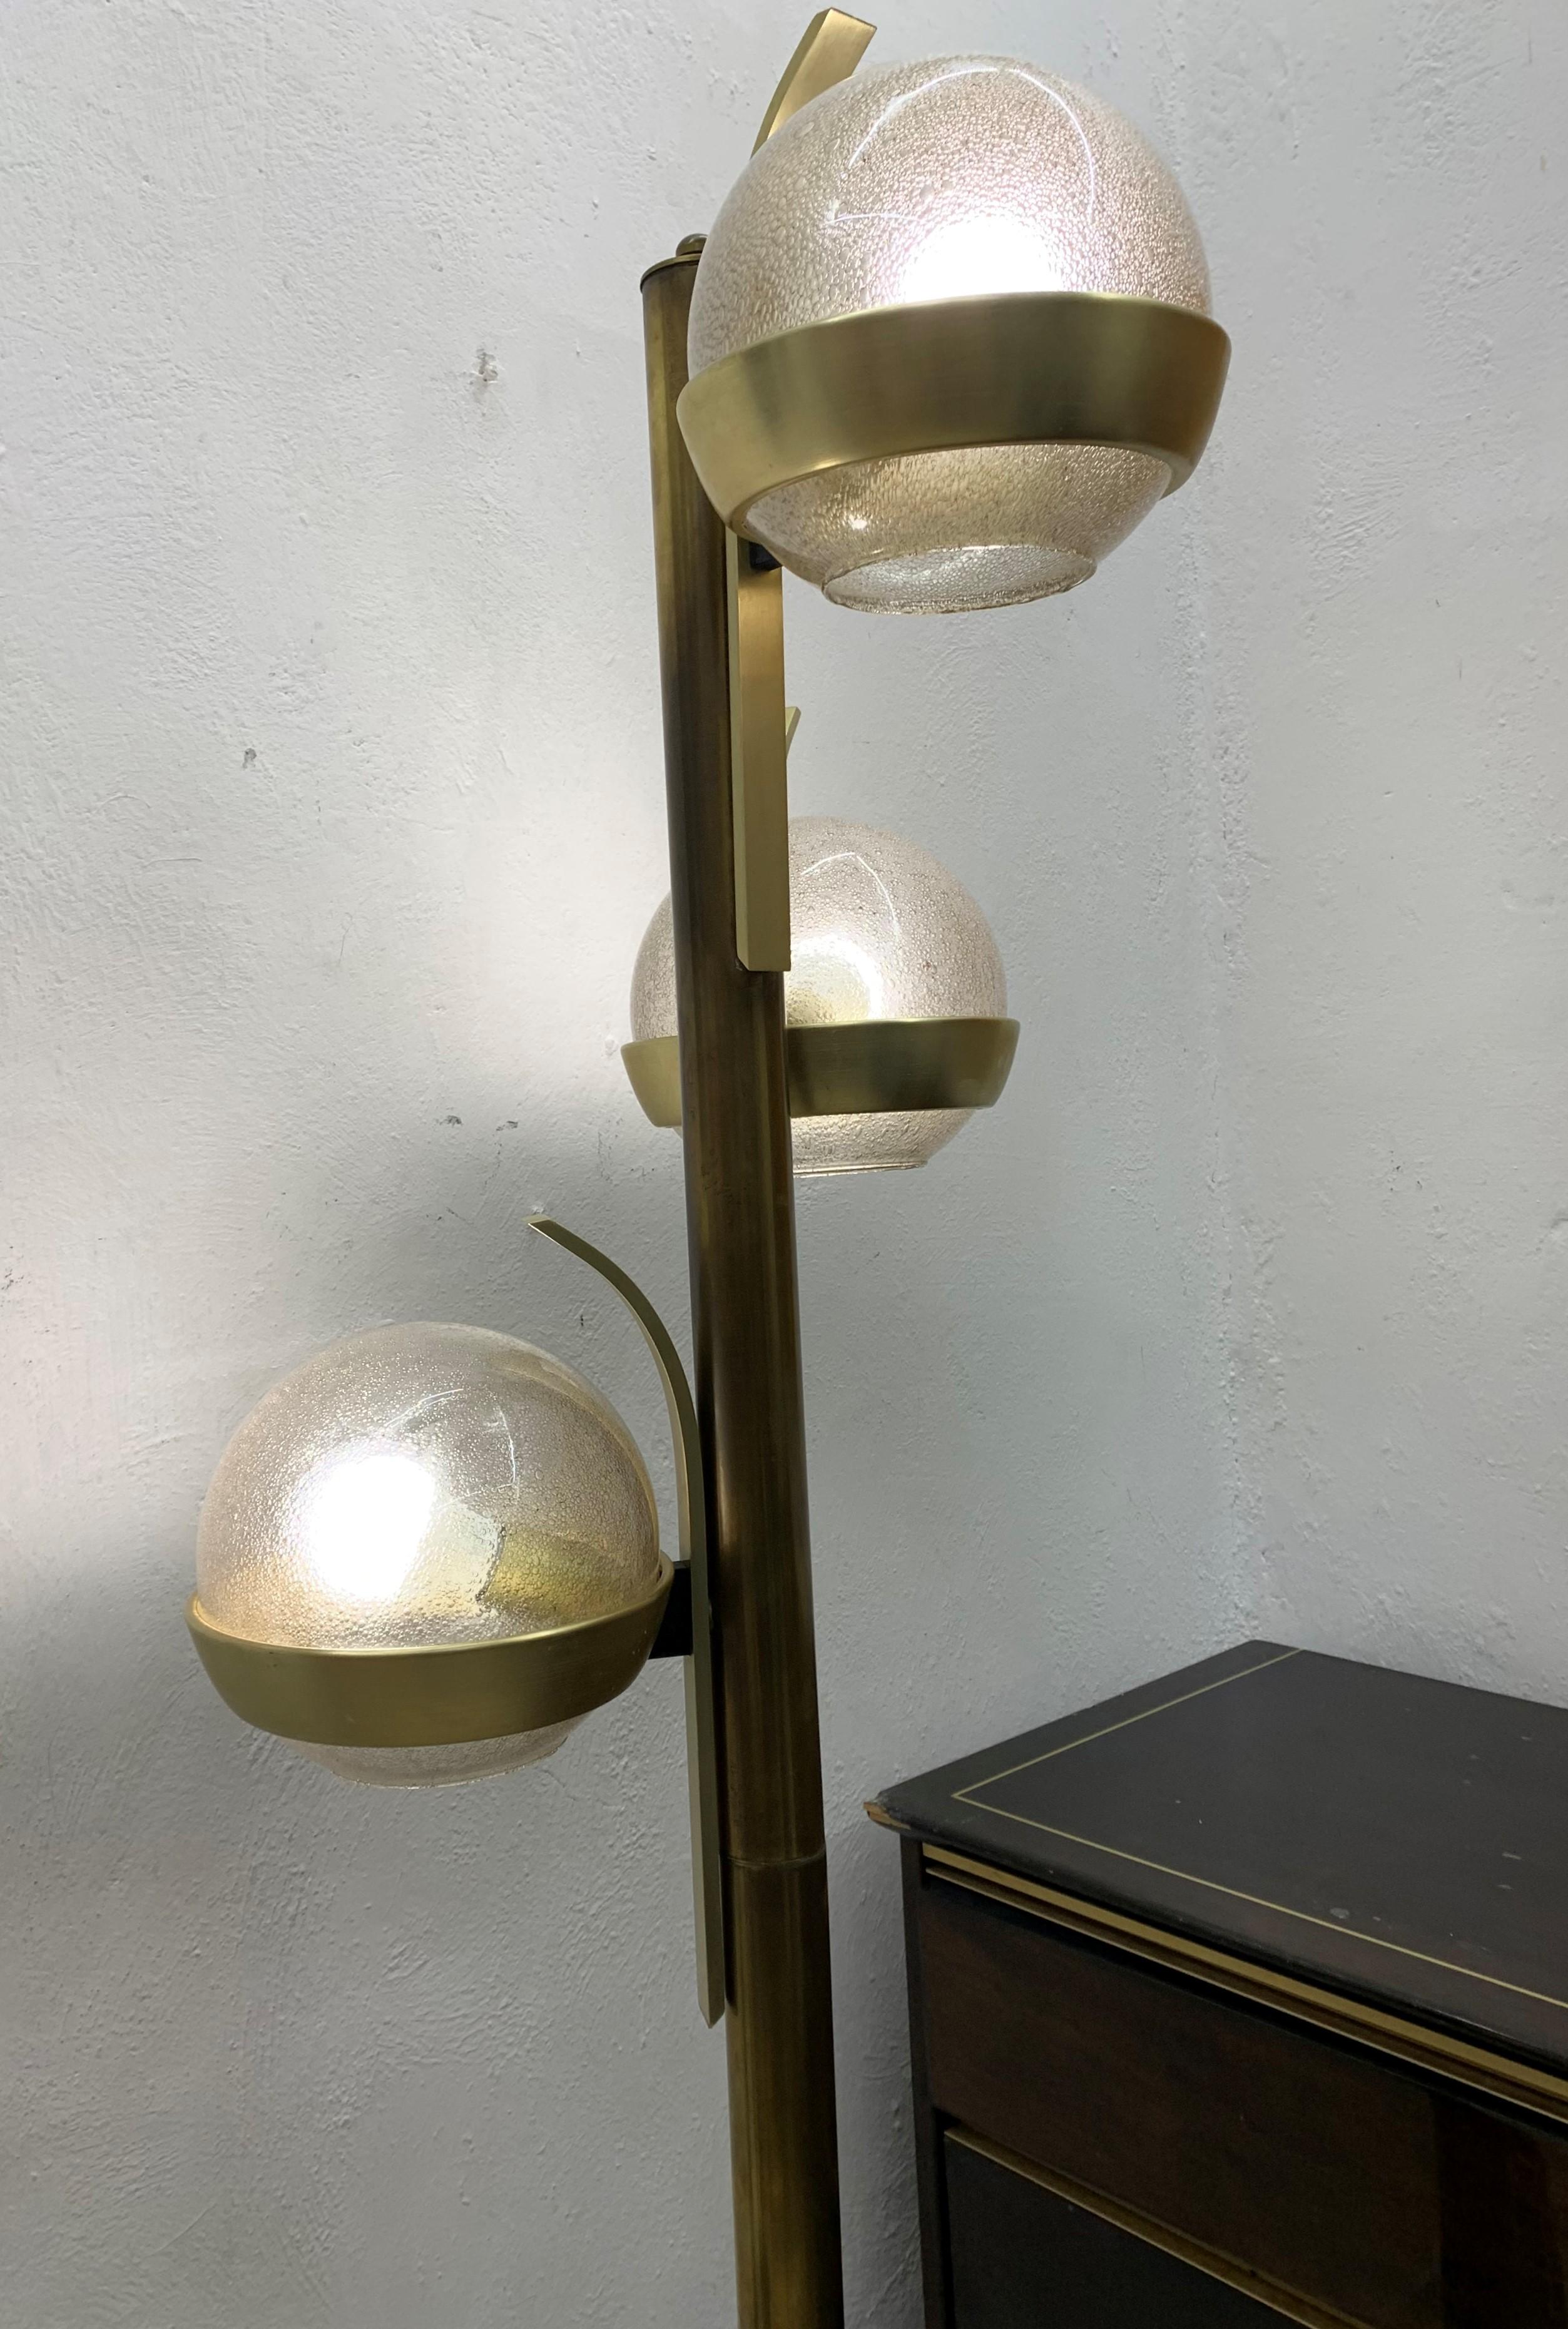 Italian Space Age Floor Lamp by Lumi in Brass and Murano Glass, circa 1960s For Sale